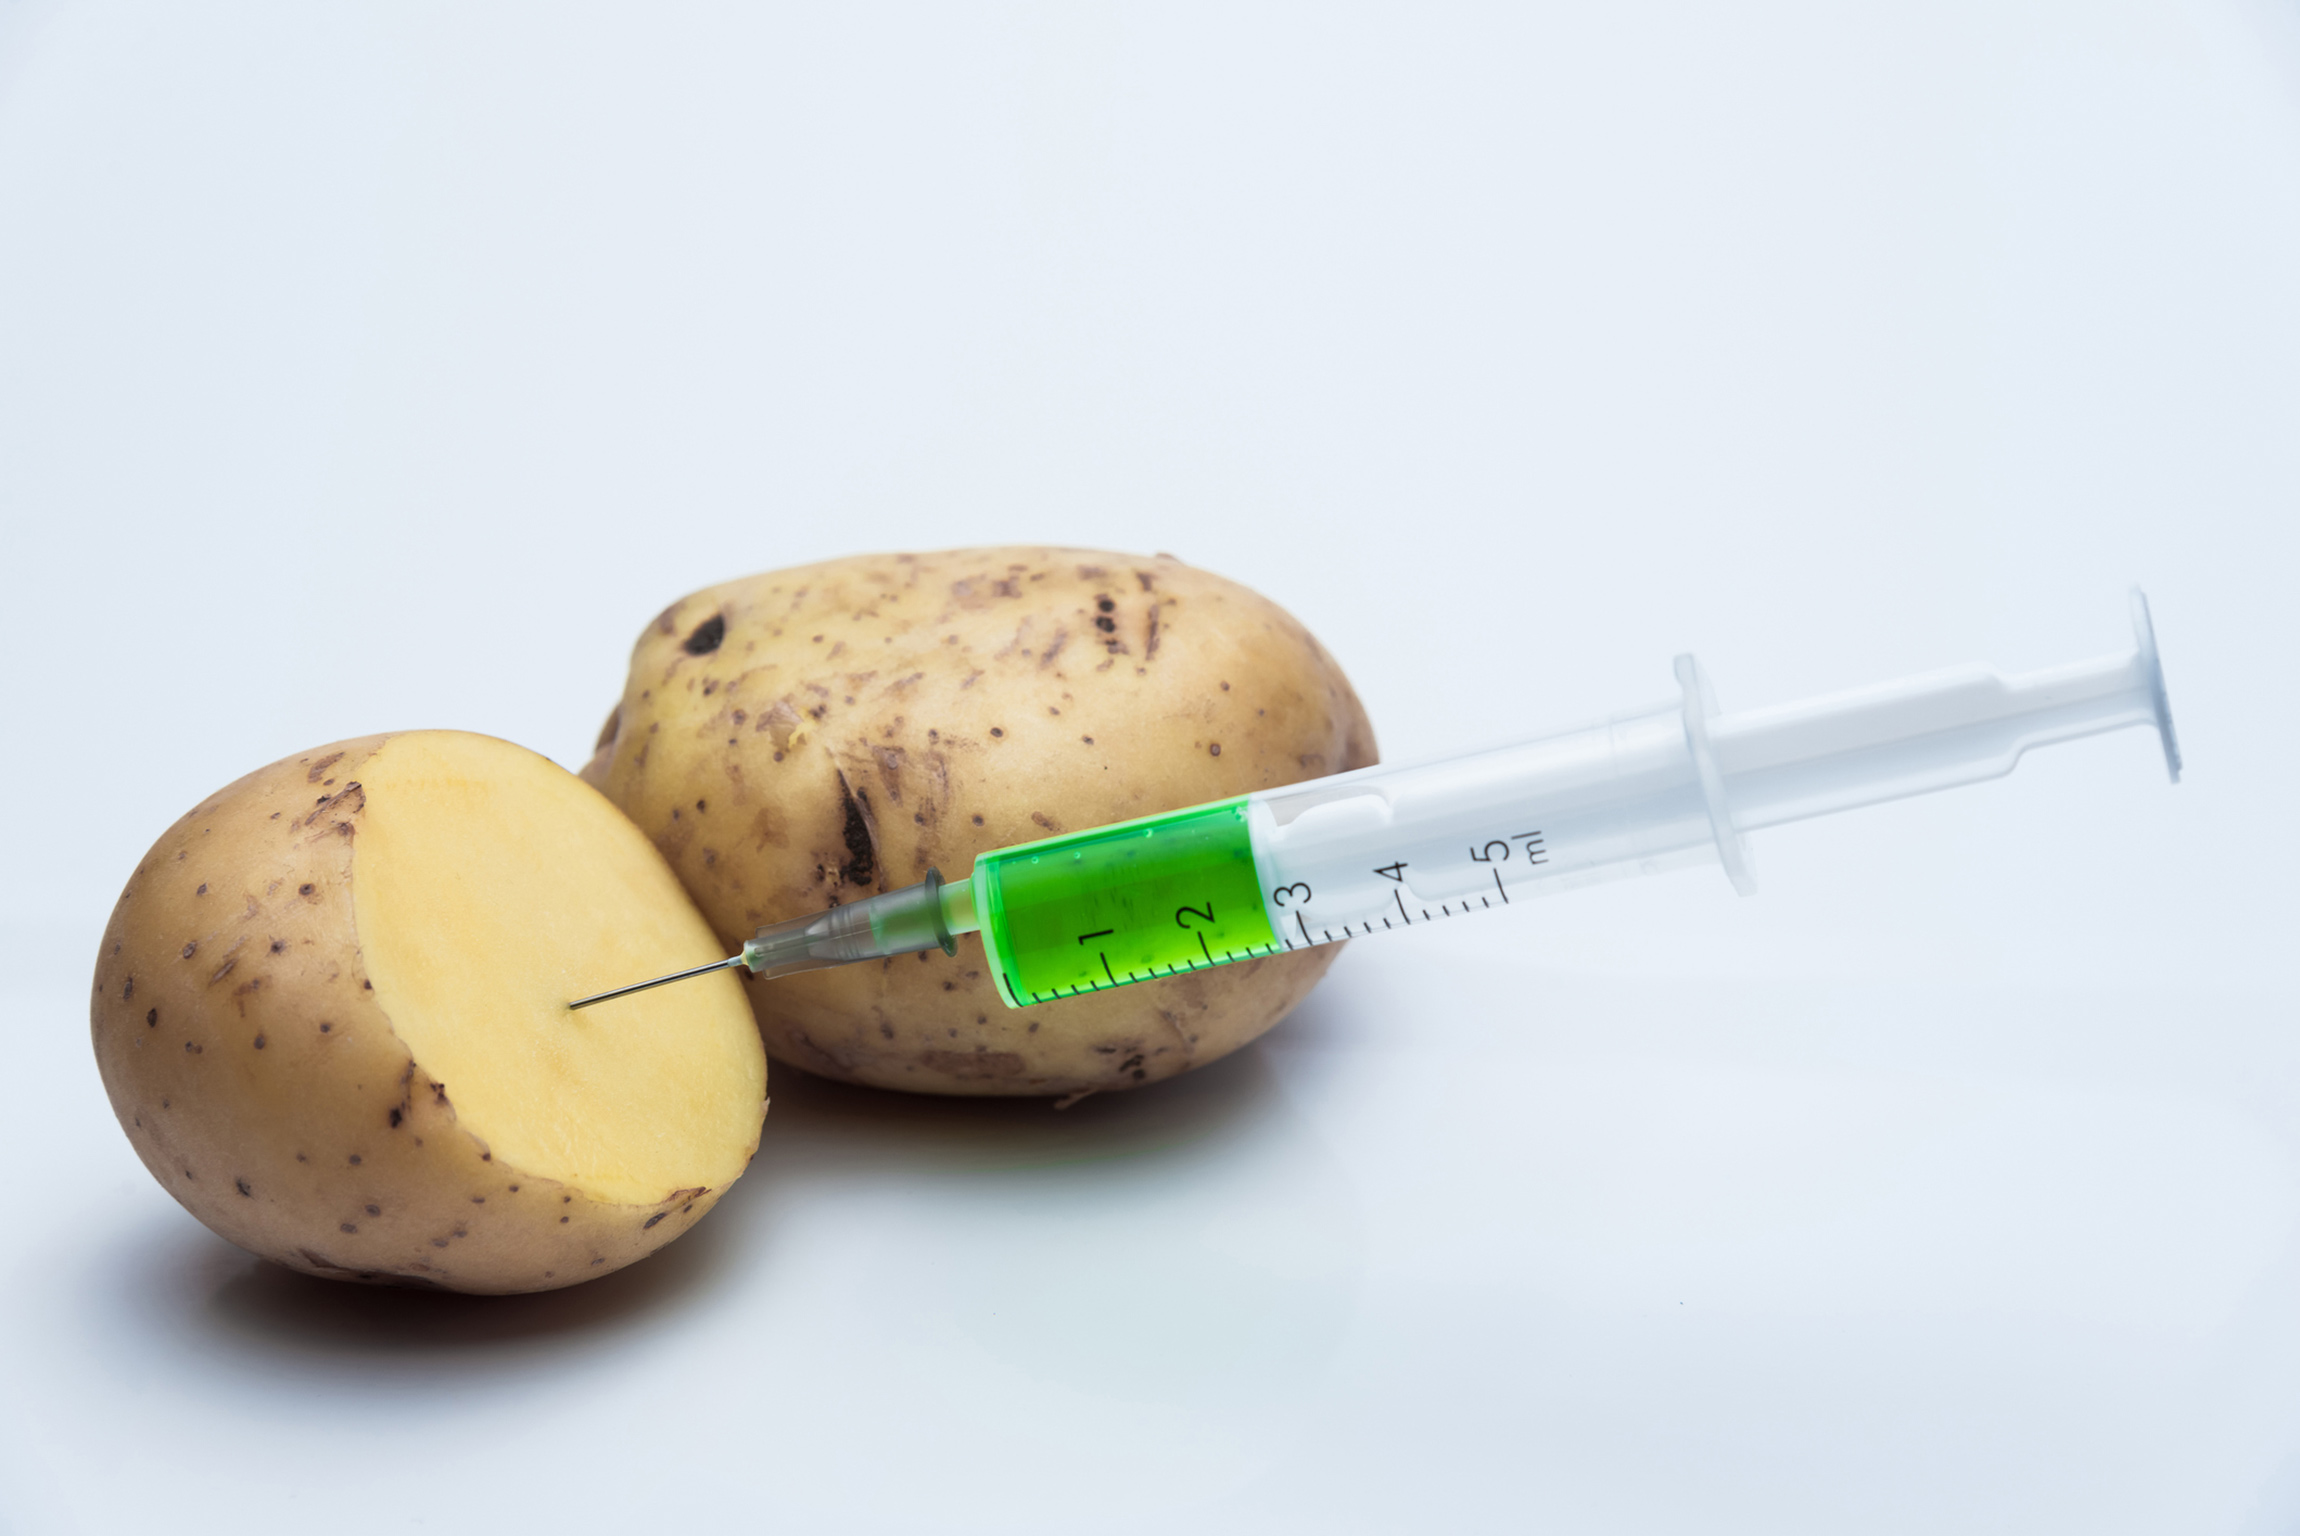 GMO potatoes: are they safe?